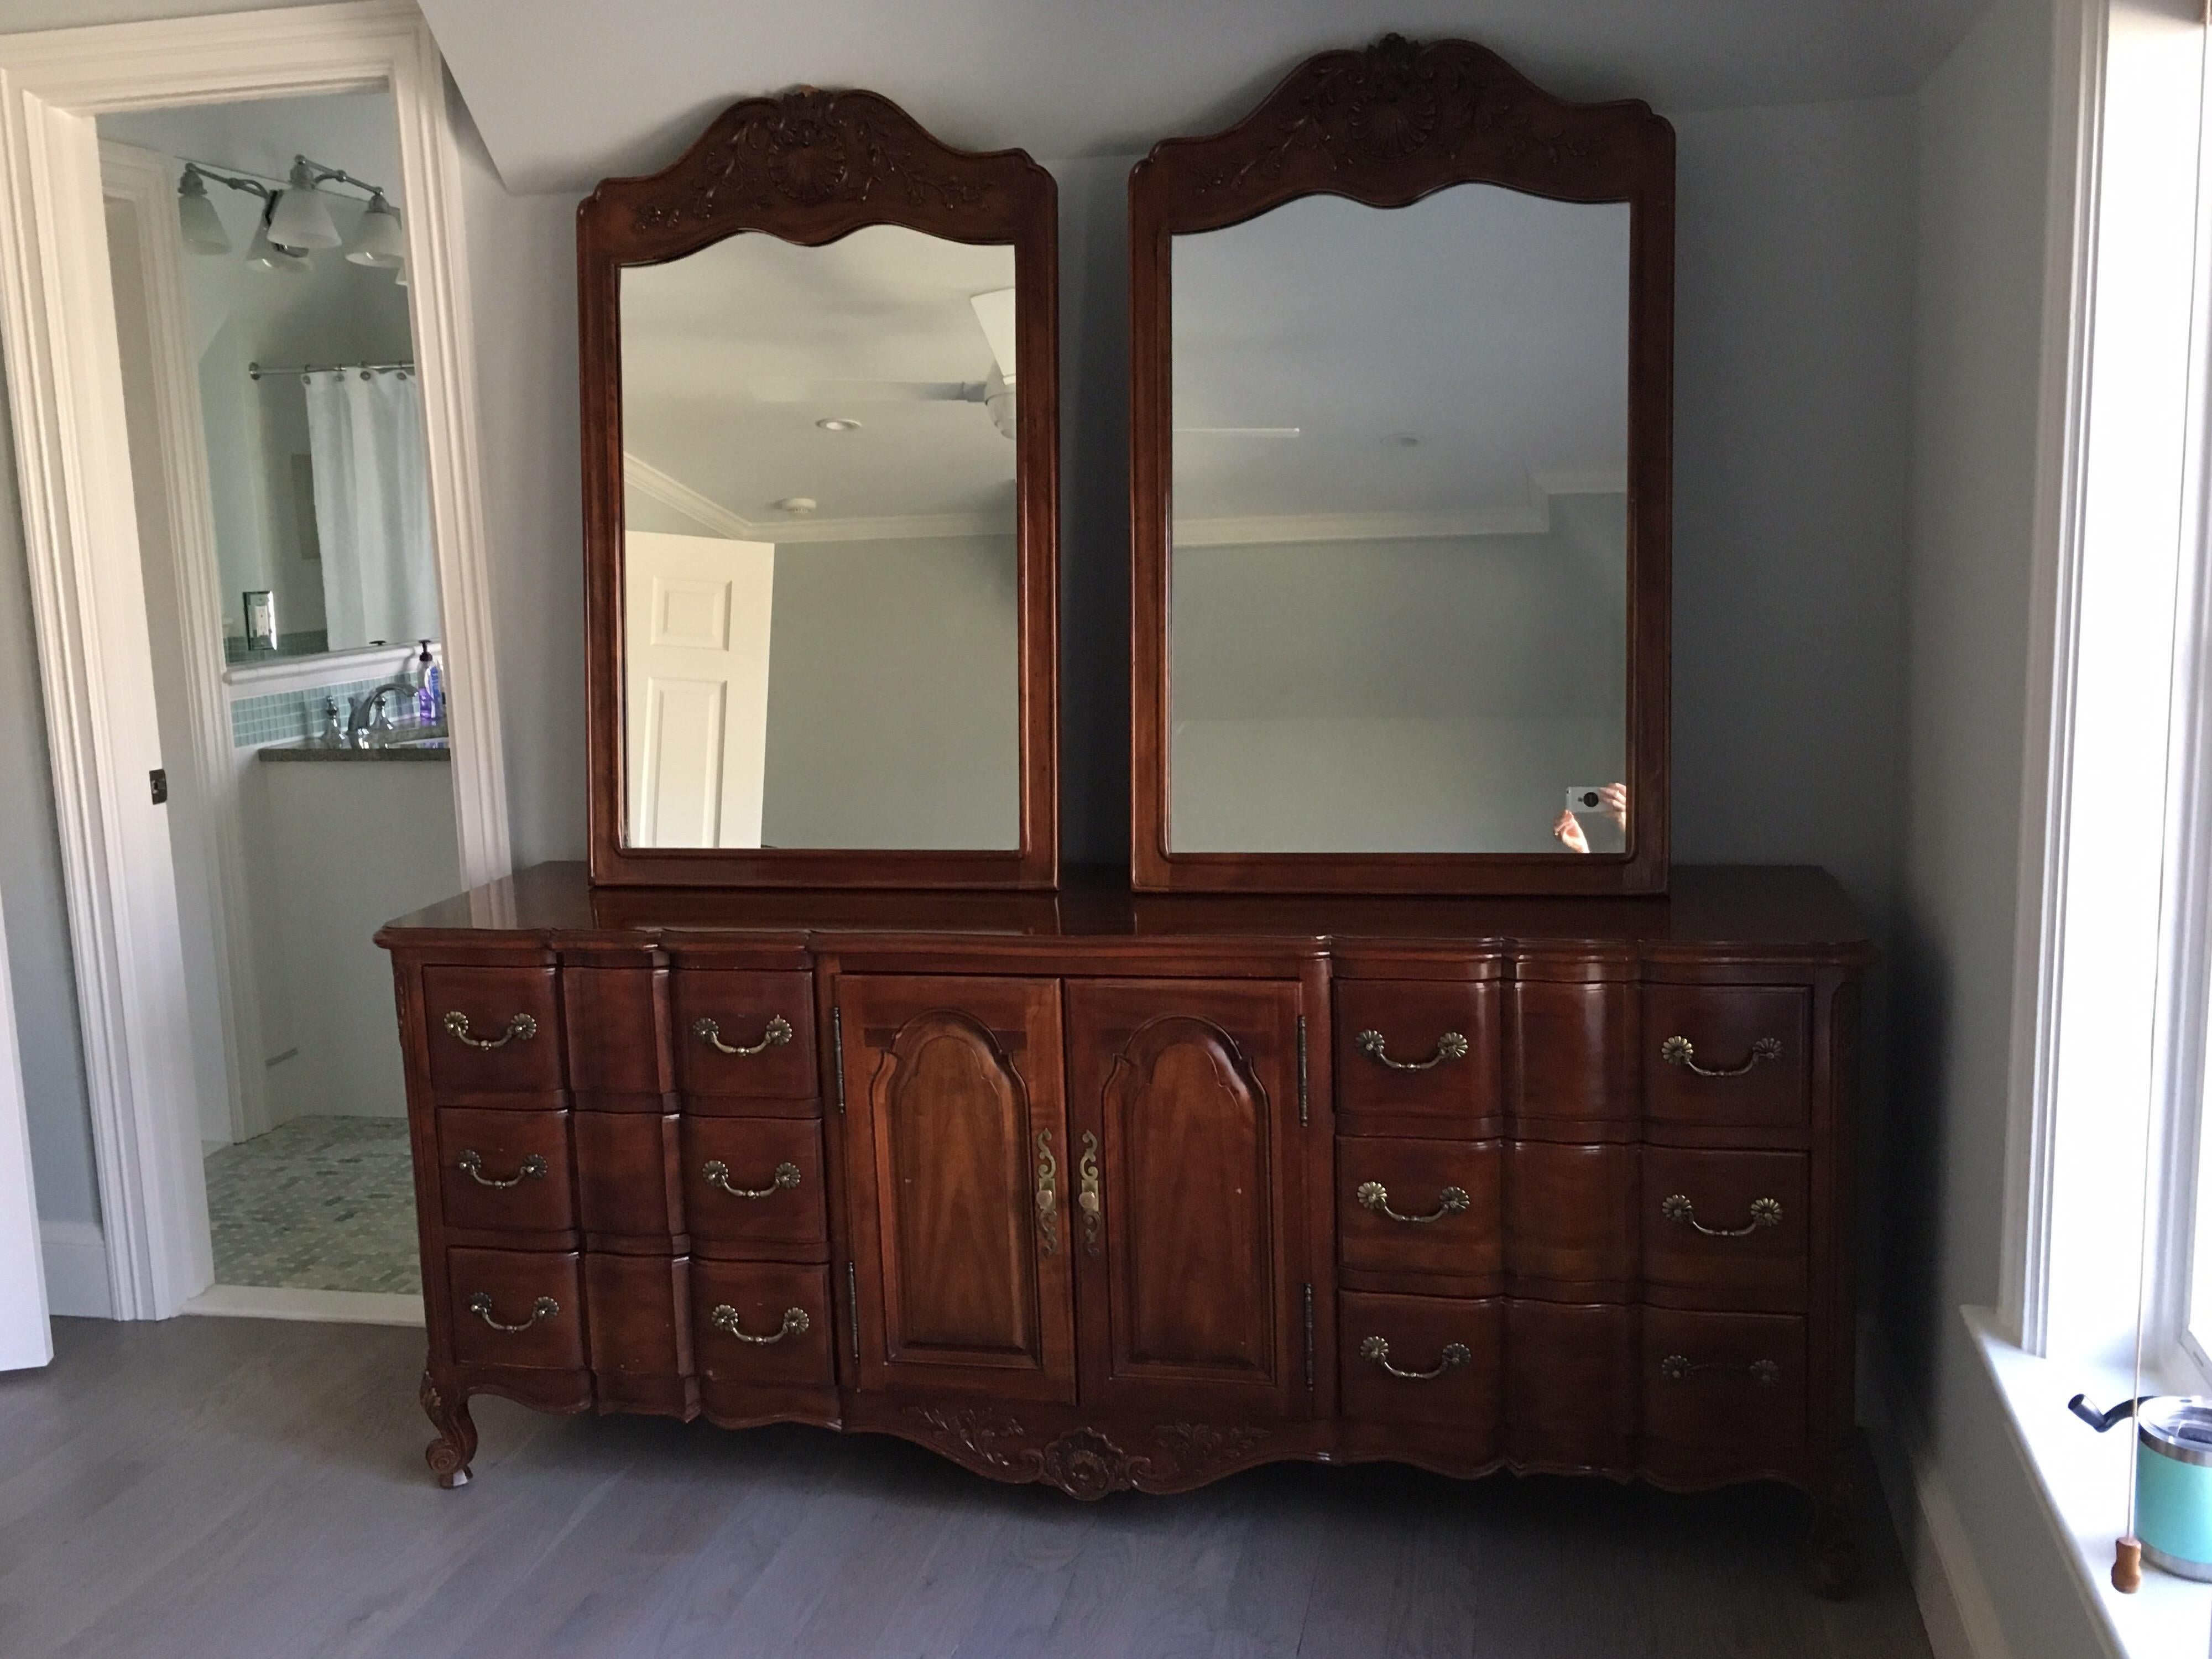 French Provincial style bedroom Credenza set with double mirrors by John Widdicomb, marked with plaque, 1960s
Six drawers 22